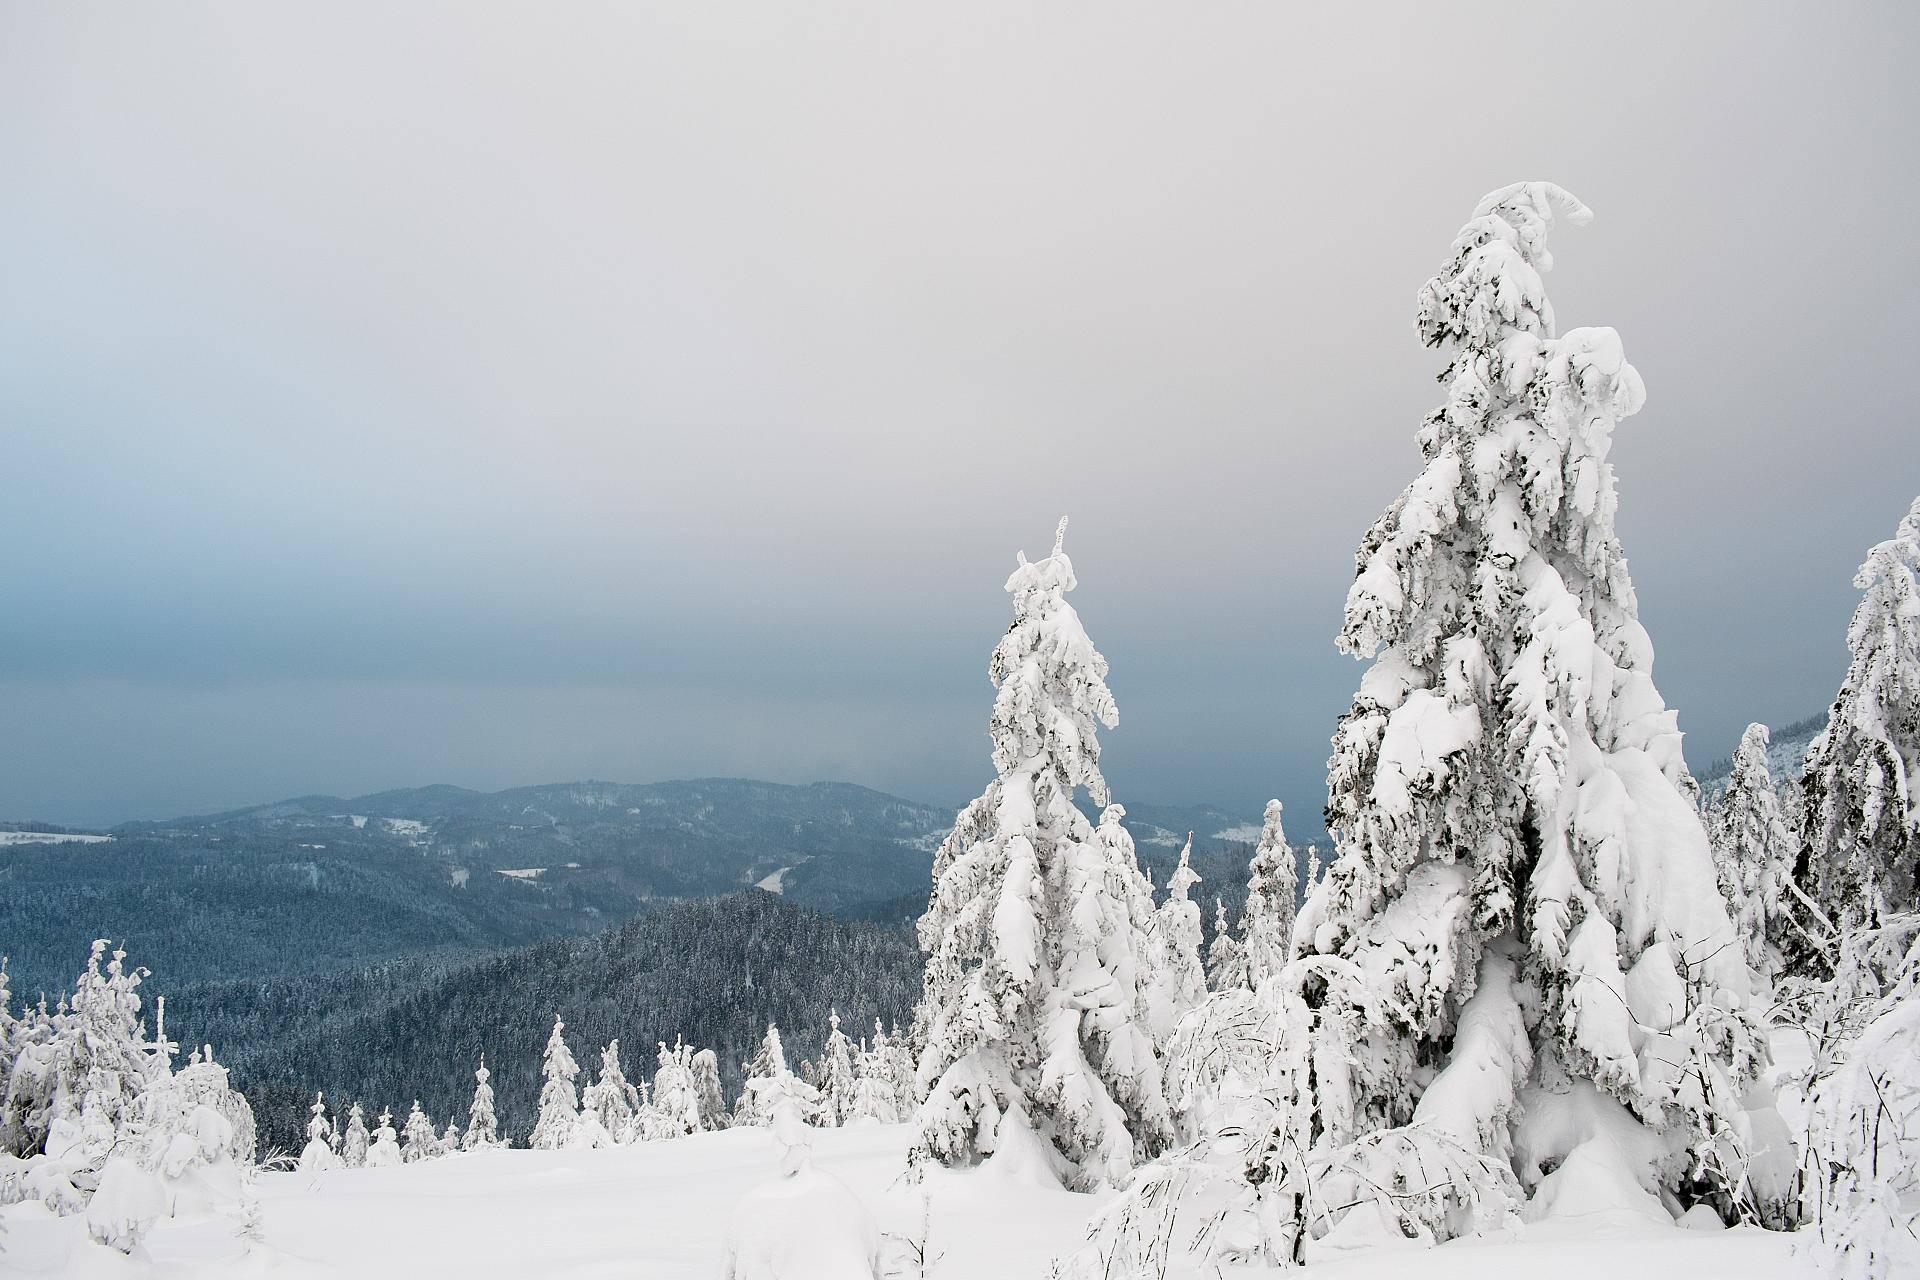 Snowshoes hikes trough the Black Forest: Explore the Black Forest - Hotel Grüner Wald